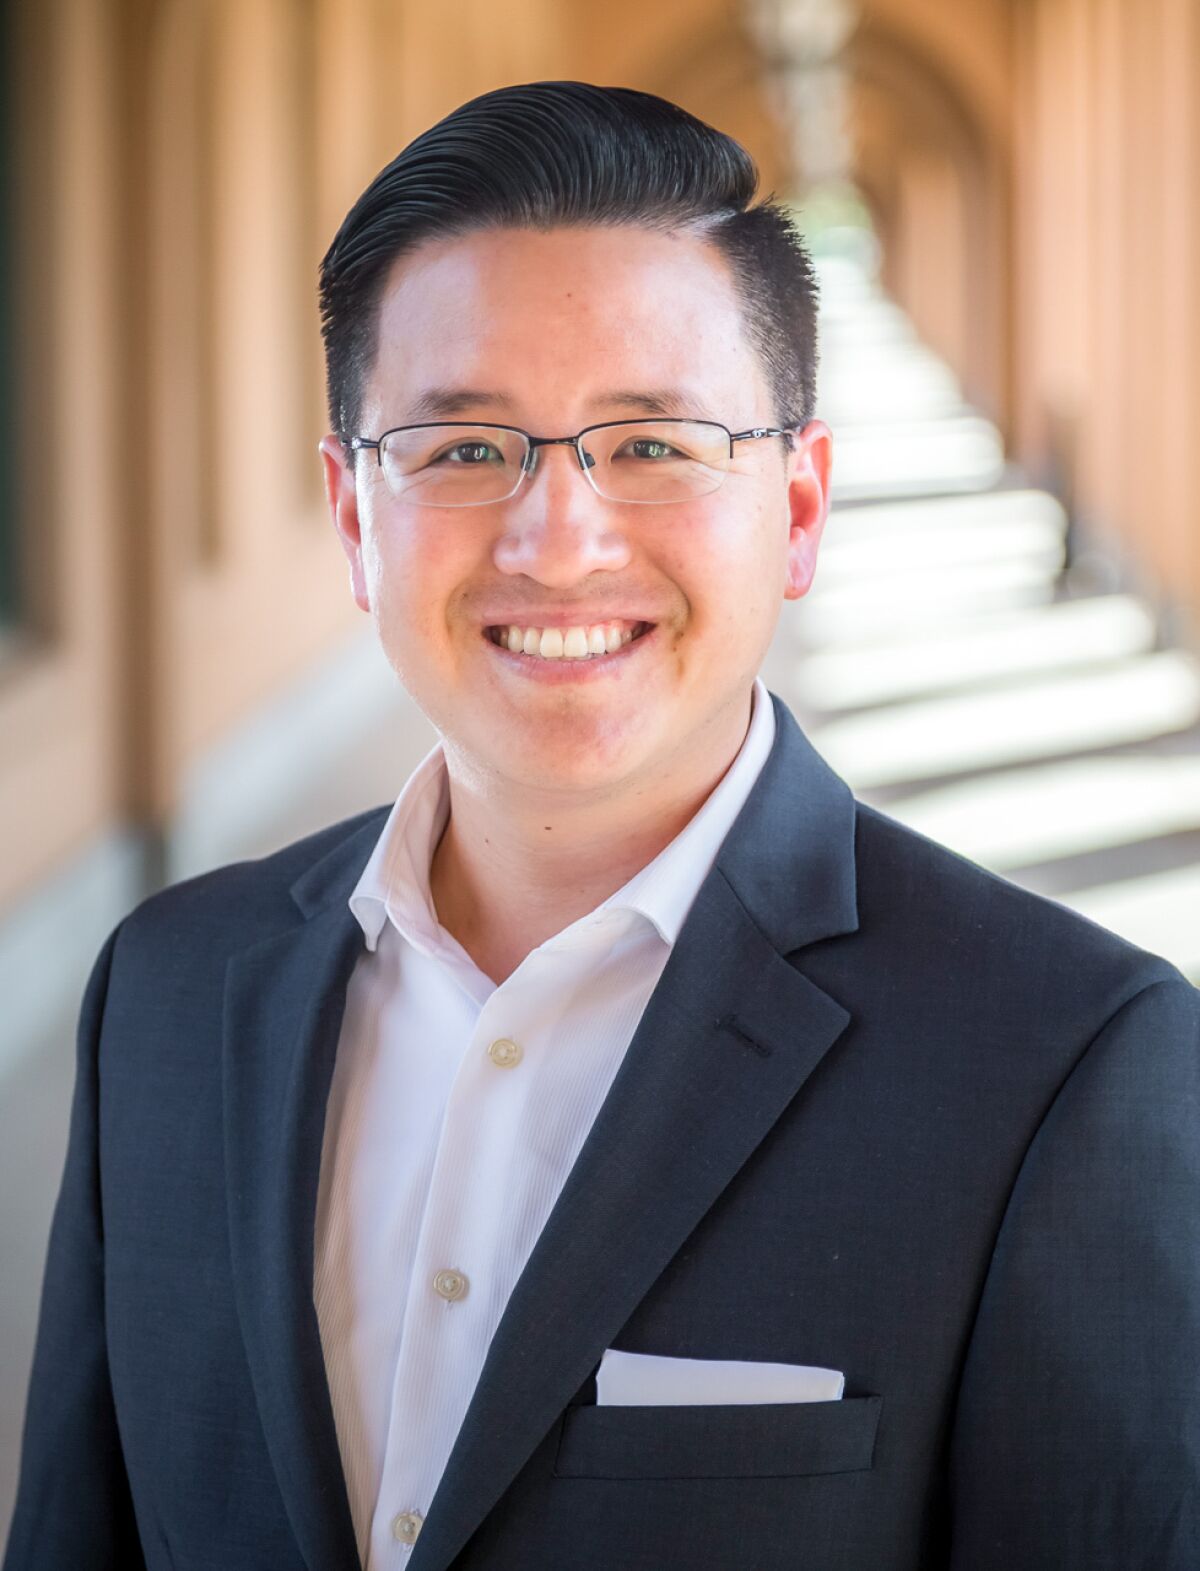 Kent Lee is running to represent San Diego City Council District 6.